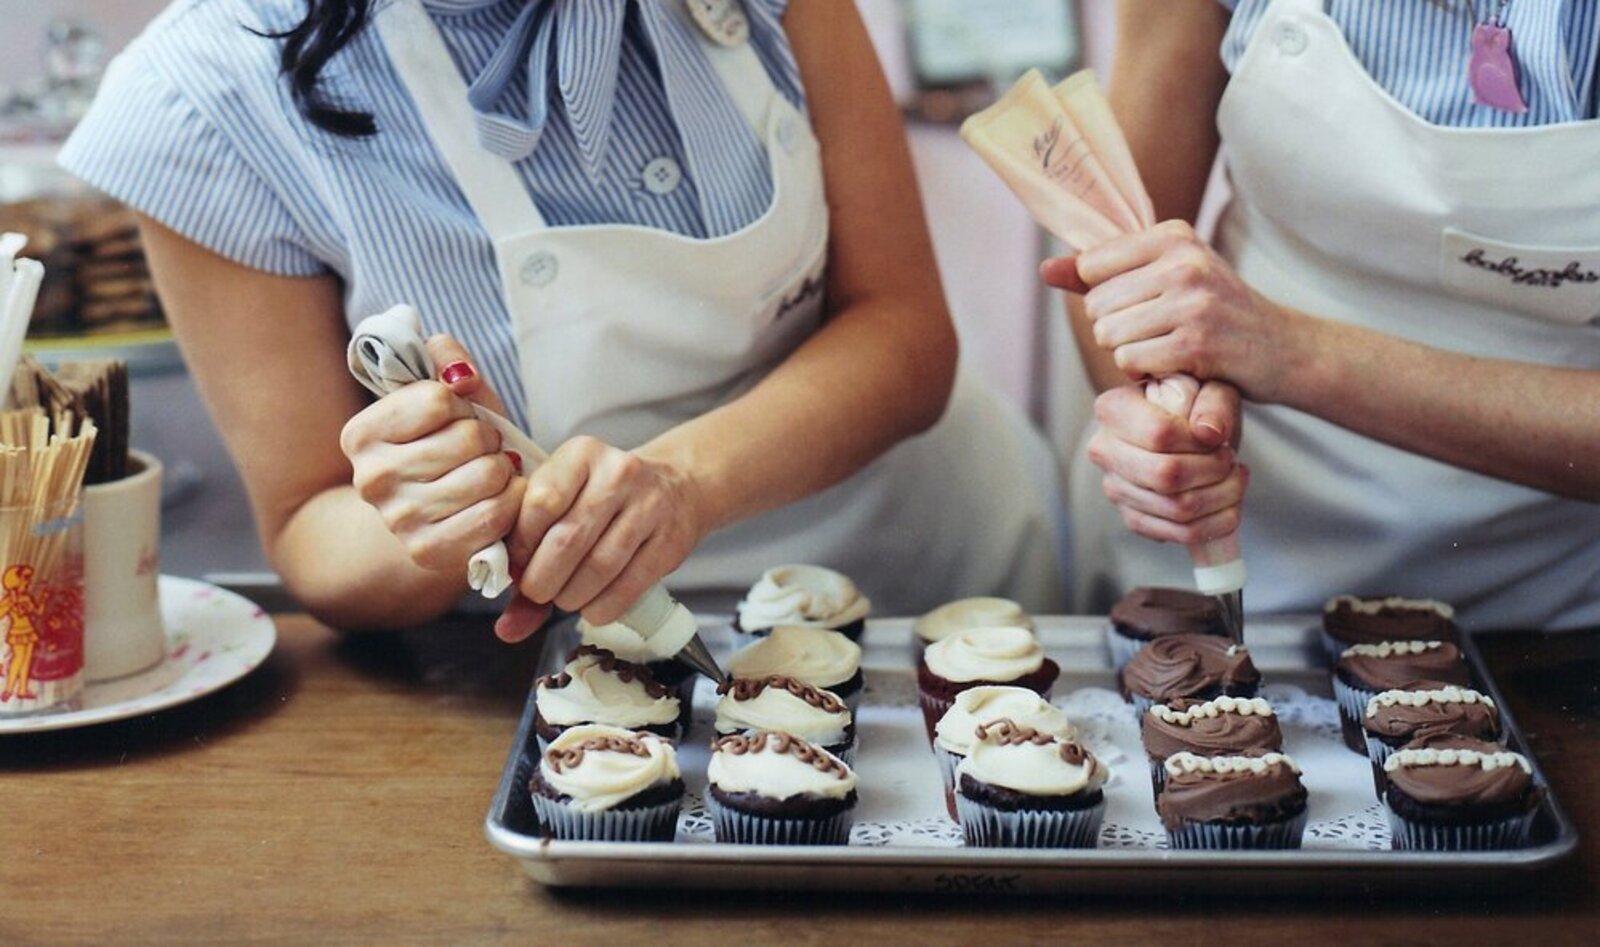 Vegan Cupcakes Near Me: 15 Places to Satisfy Your Sweet Tooth